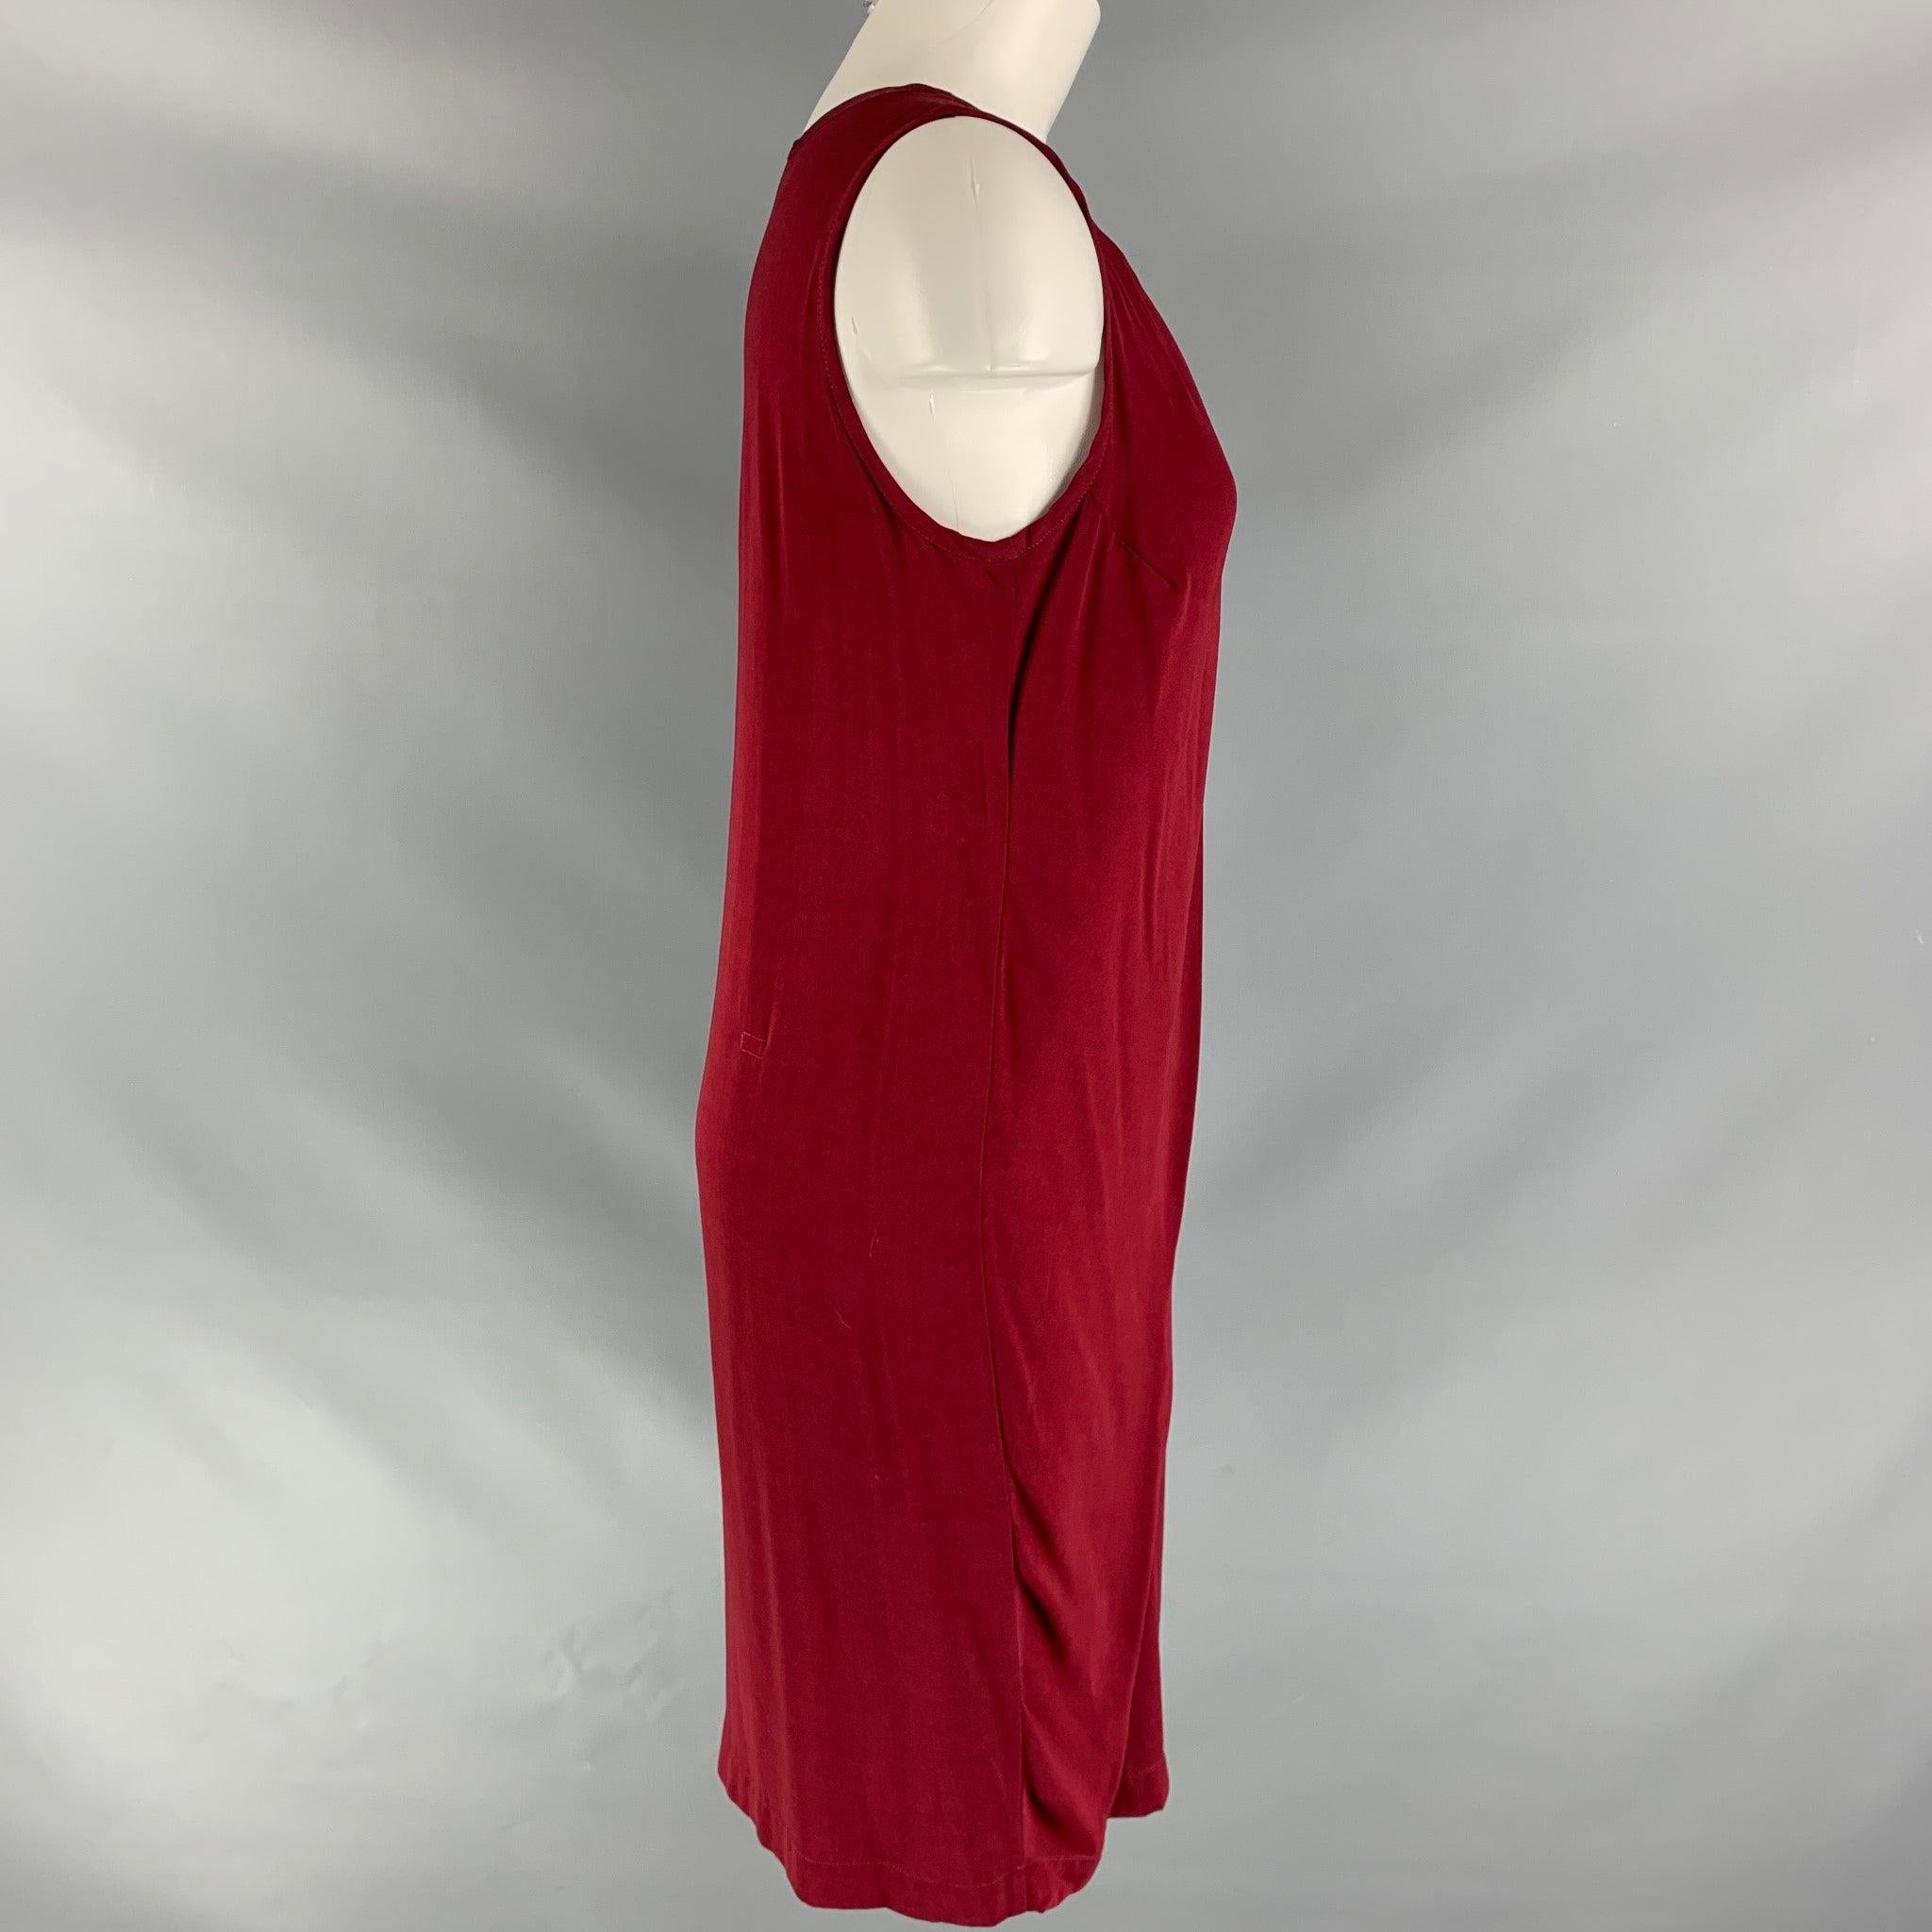 ANN DEMEULEMEESTER sleeveless casual dress comes in a burgundy rayon fabric and crew neck features an self tie. Very Good Pre-Owned Condition.
Approximately 1 inch repair at back. 

Marked:   38 

Measurements: 
 
Shoulder: 13.5 inBust: 34 inLength: